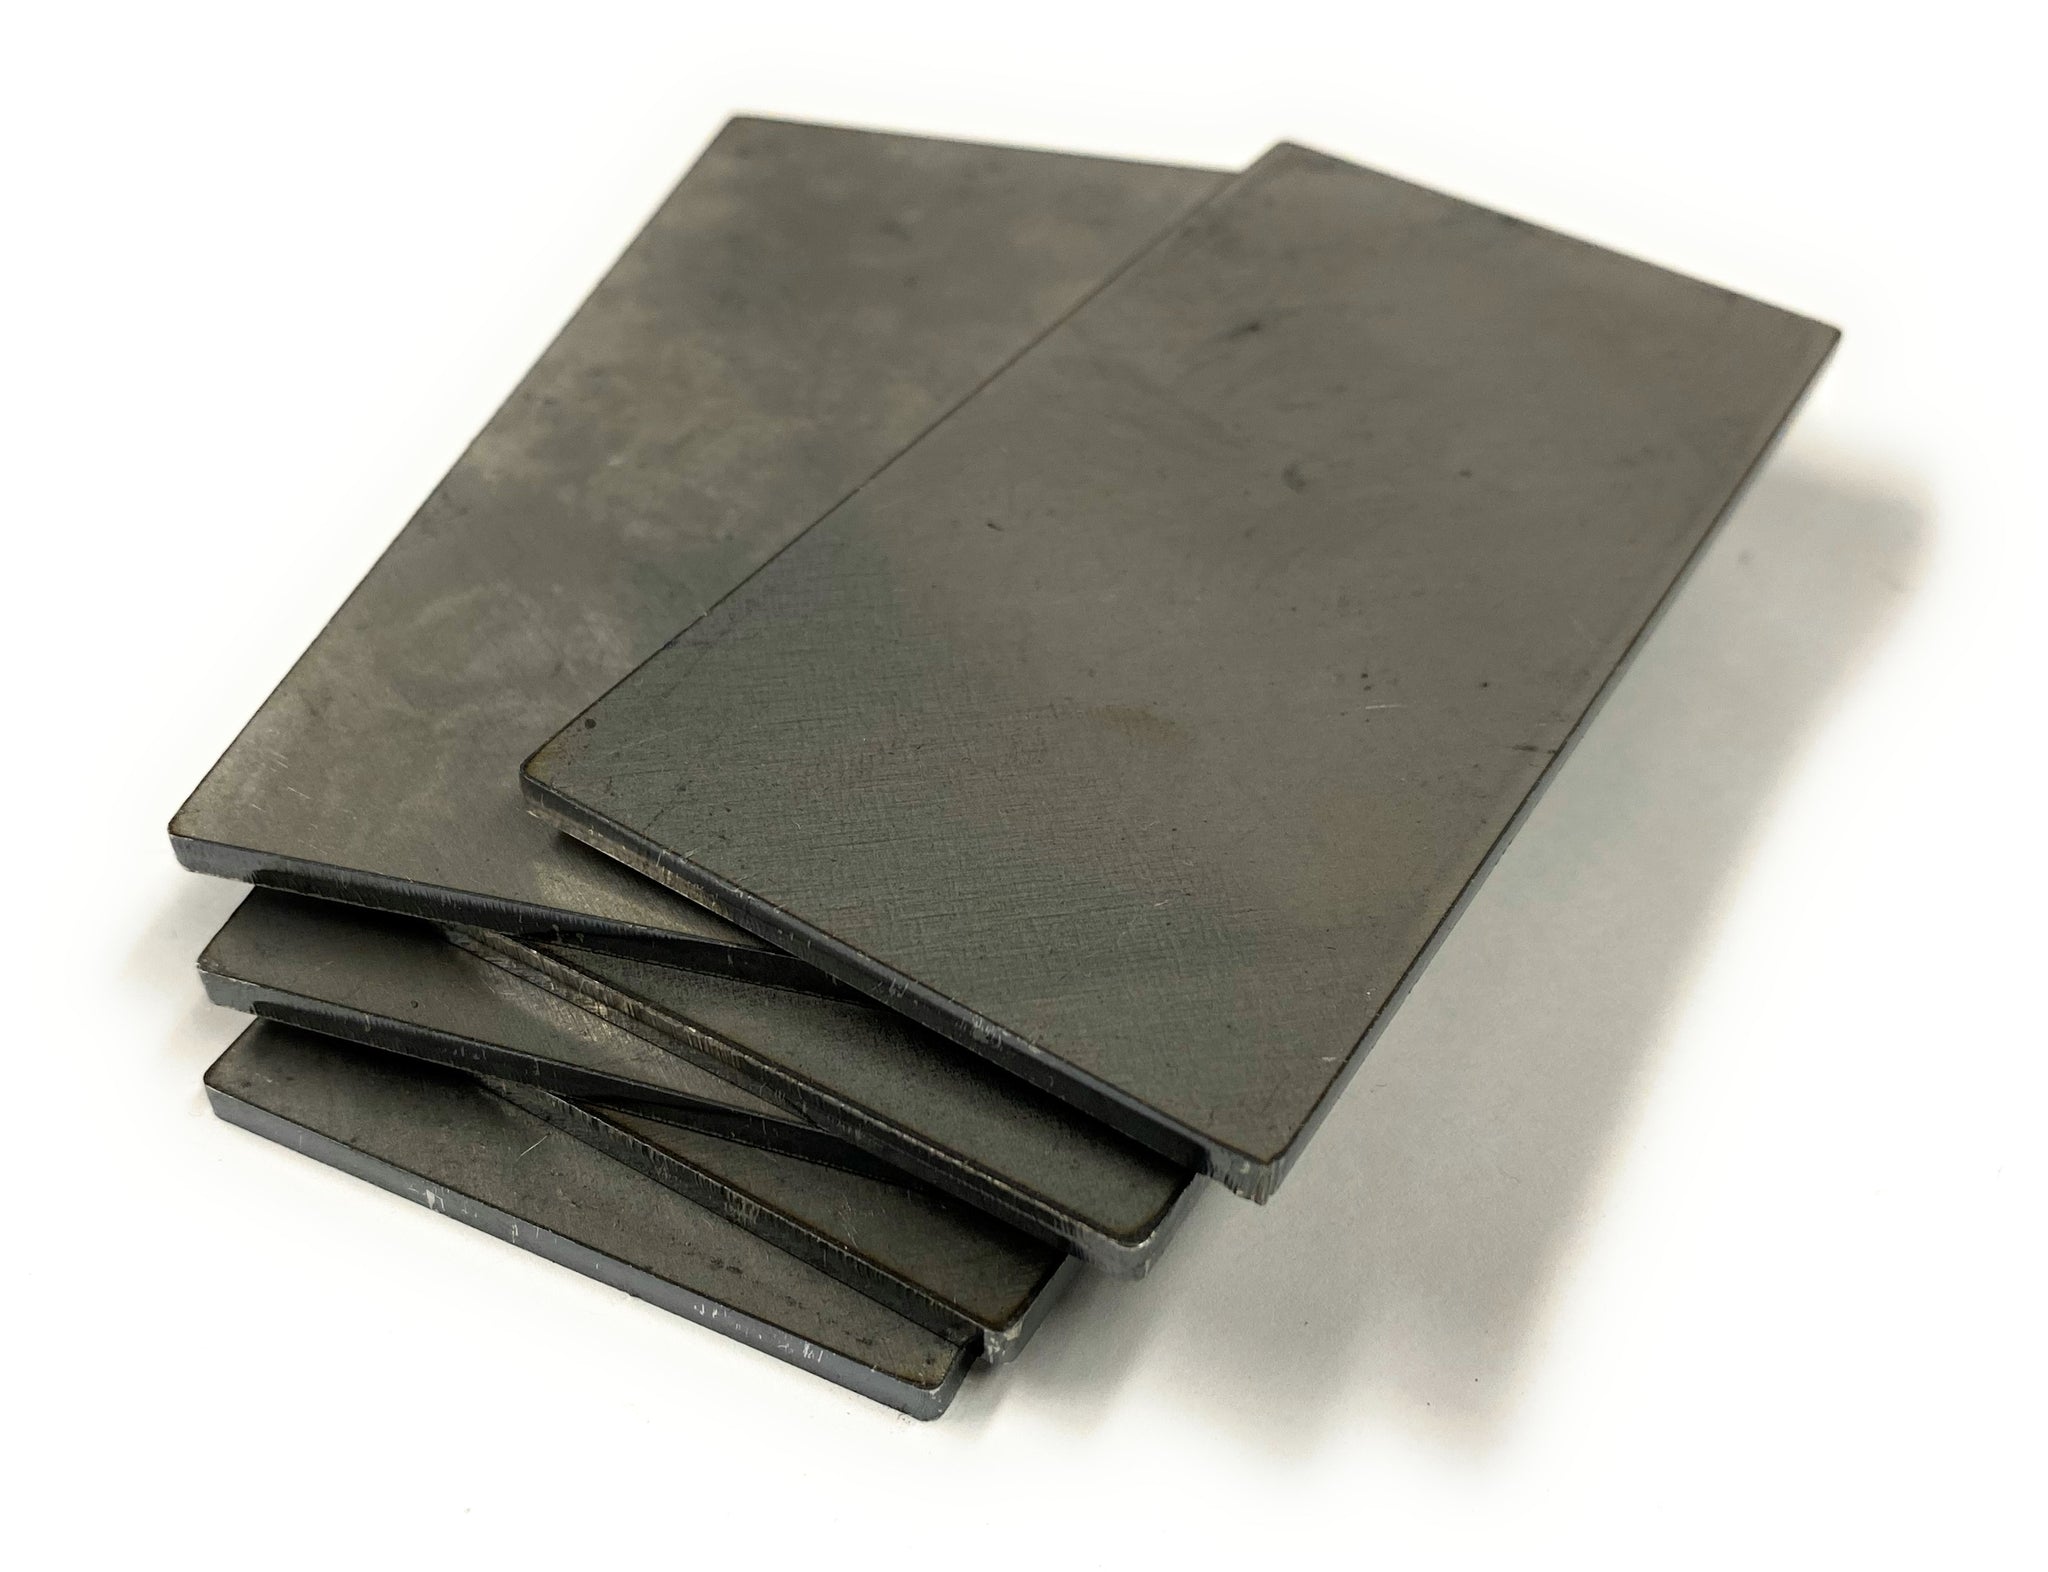 Welding Coupons - 11ga Mild Steel - 2 by 4 Inch (2"X4") - 6 Pack